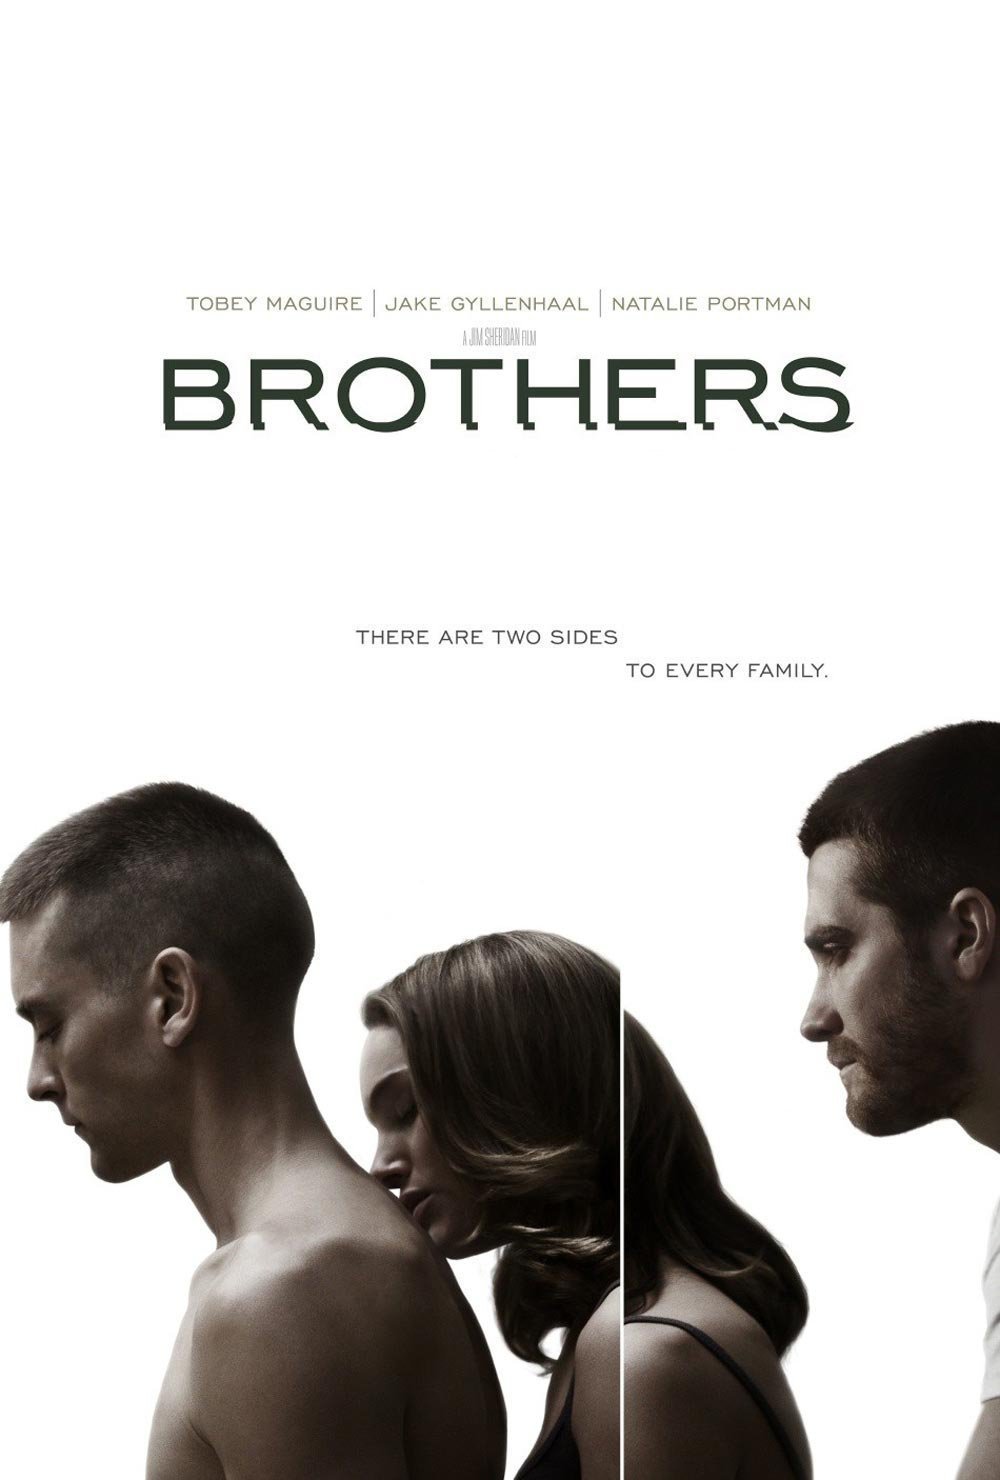 Brothers - Movies - Watch free